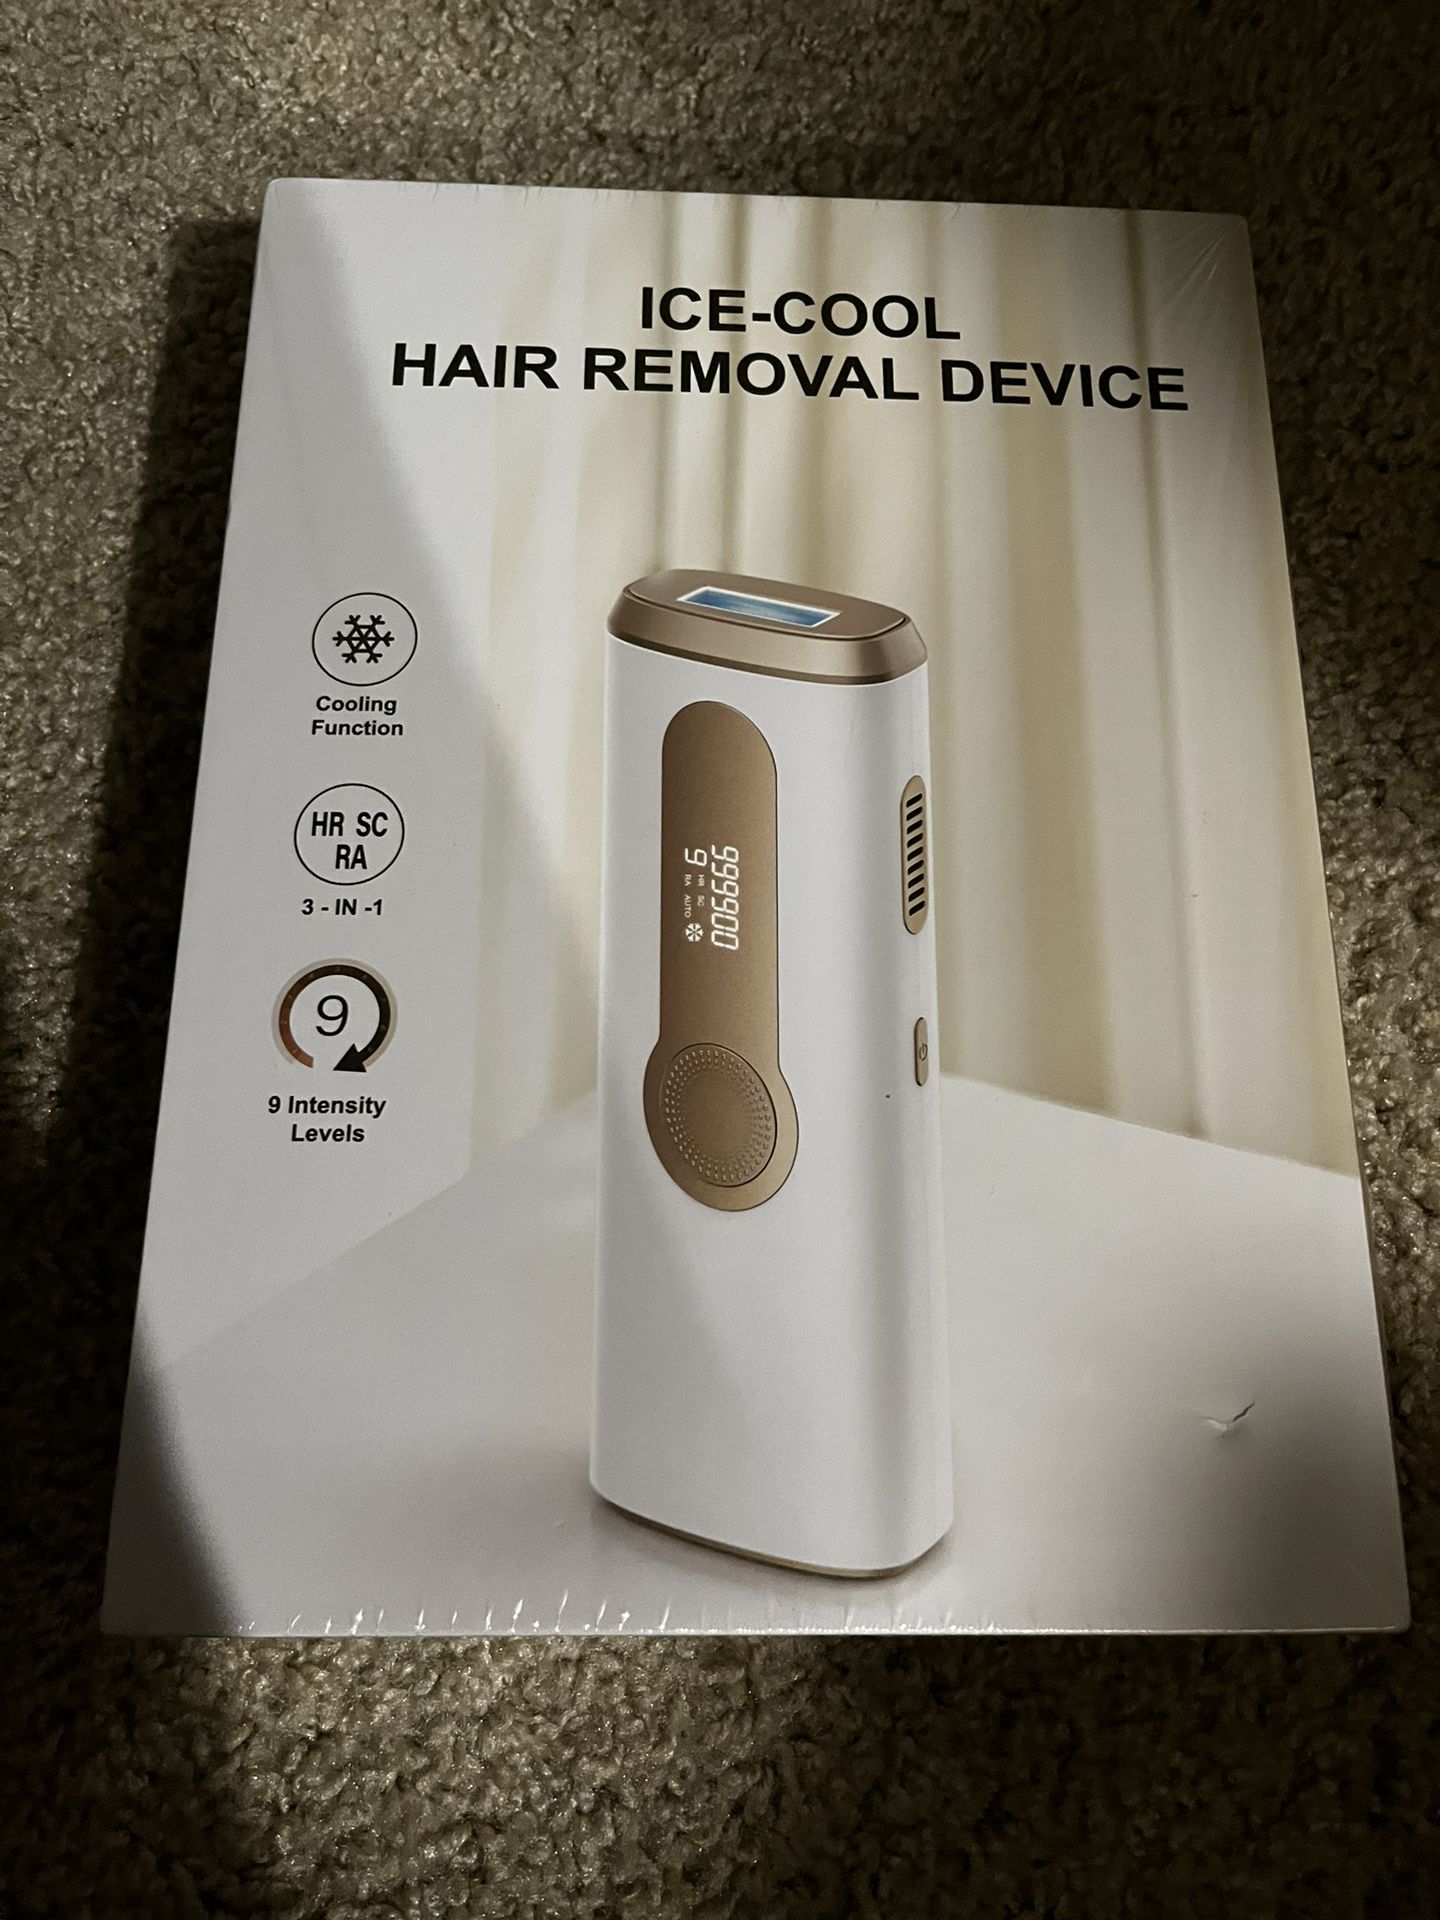 Hair Removal Device